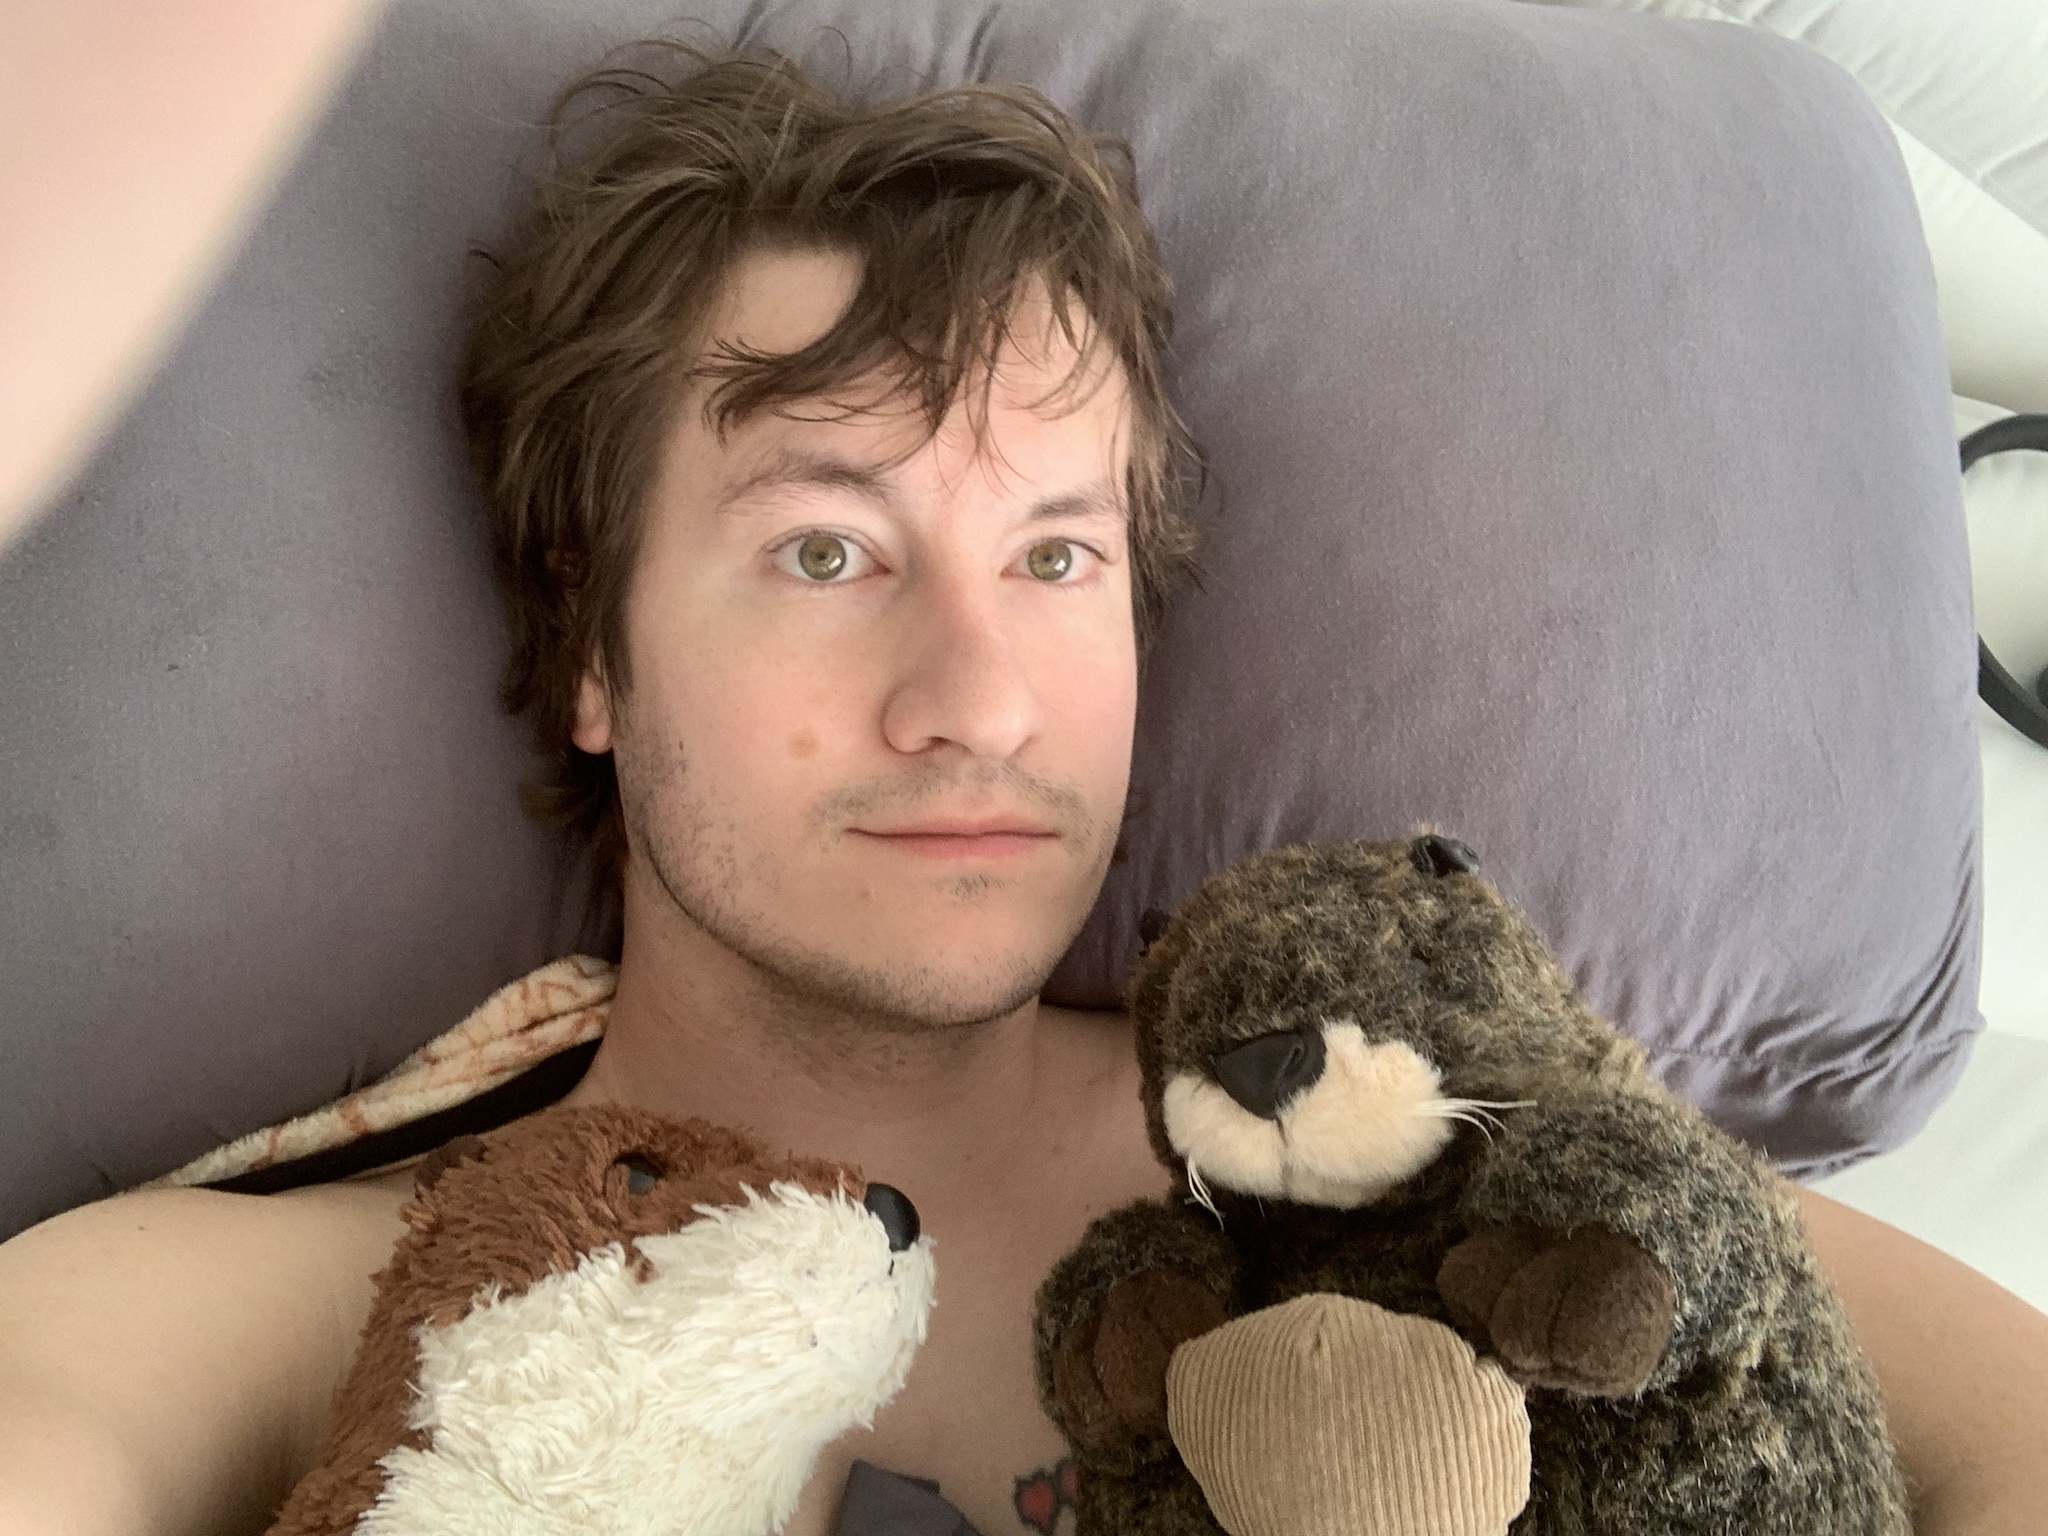 Me and the Otters Selfie! Bonus derpy cats included!